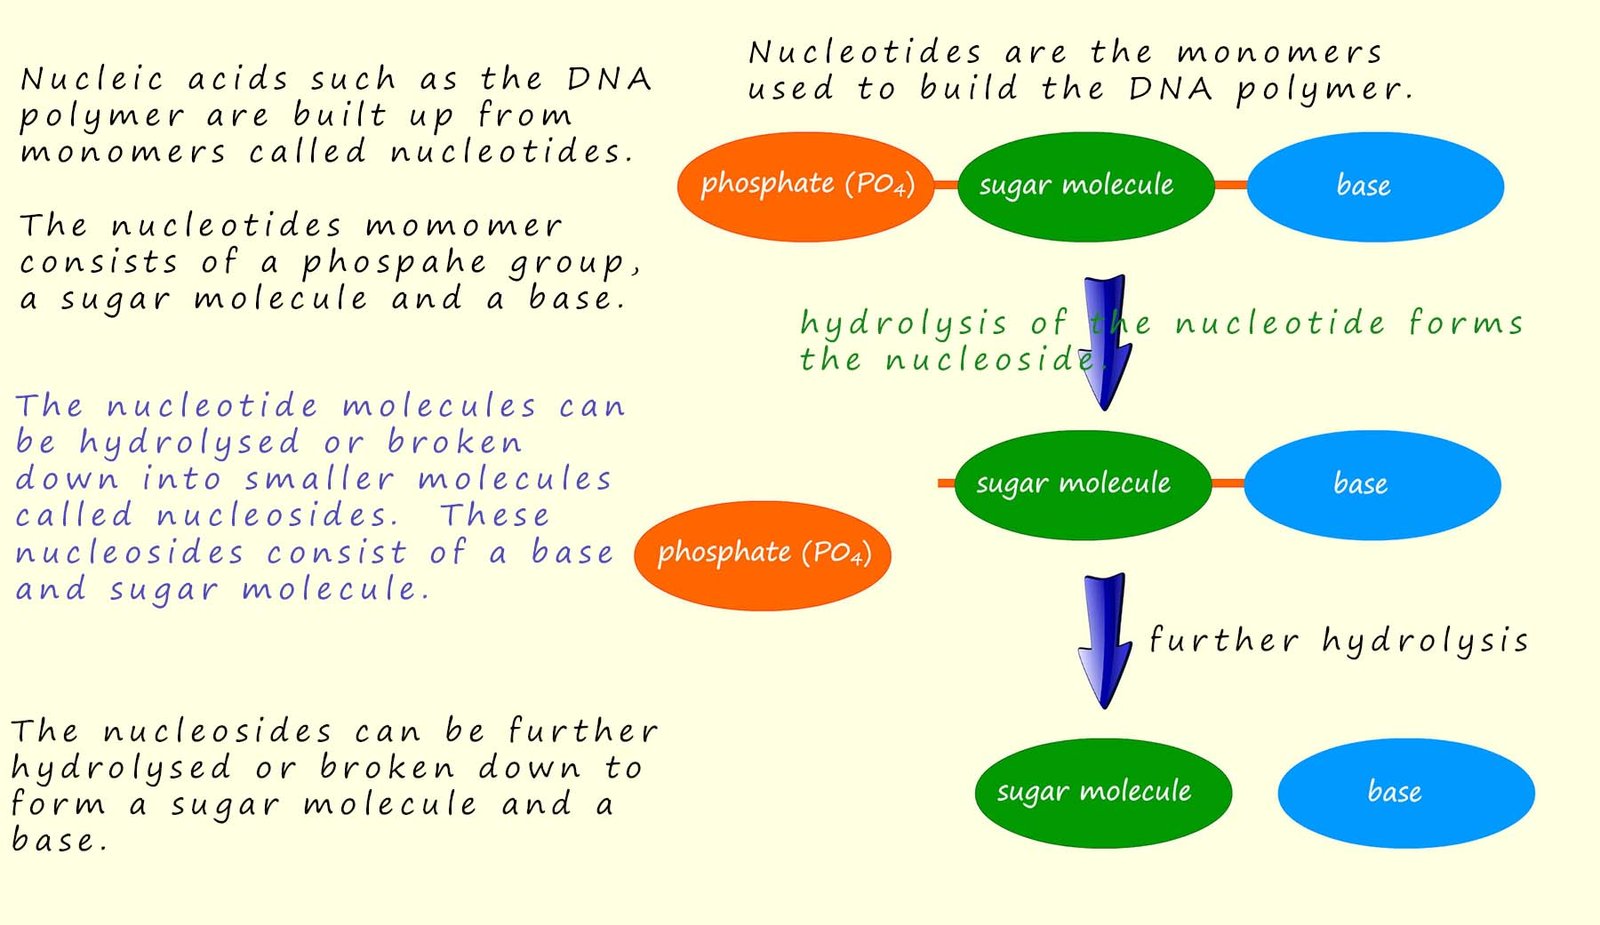 Model of the dna structure showing nucleotides and nucleosides.